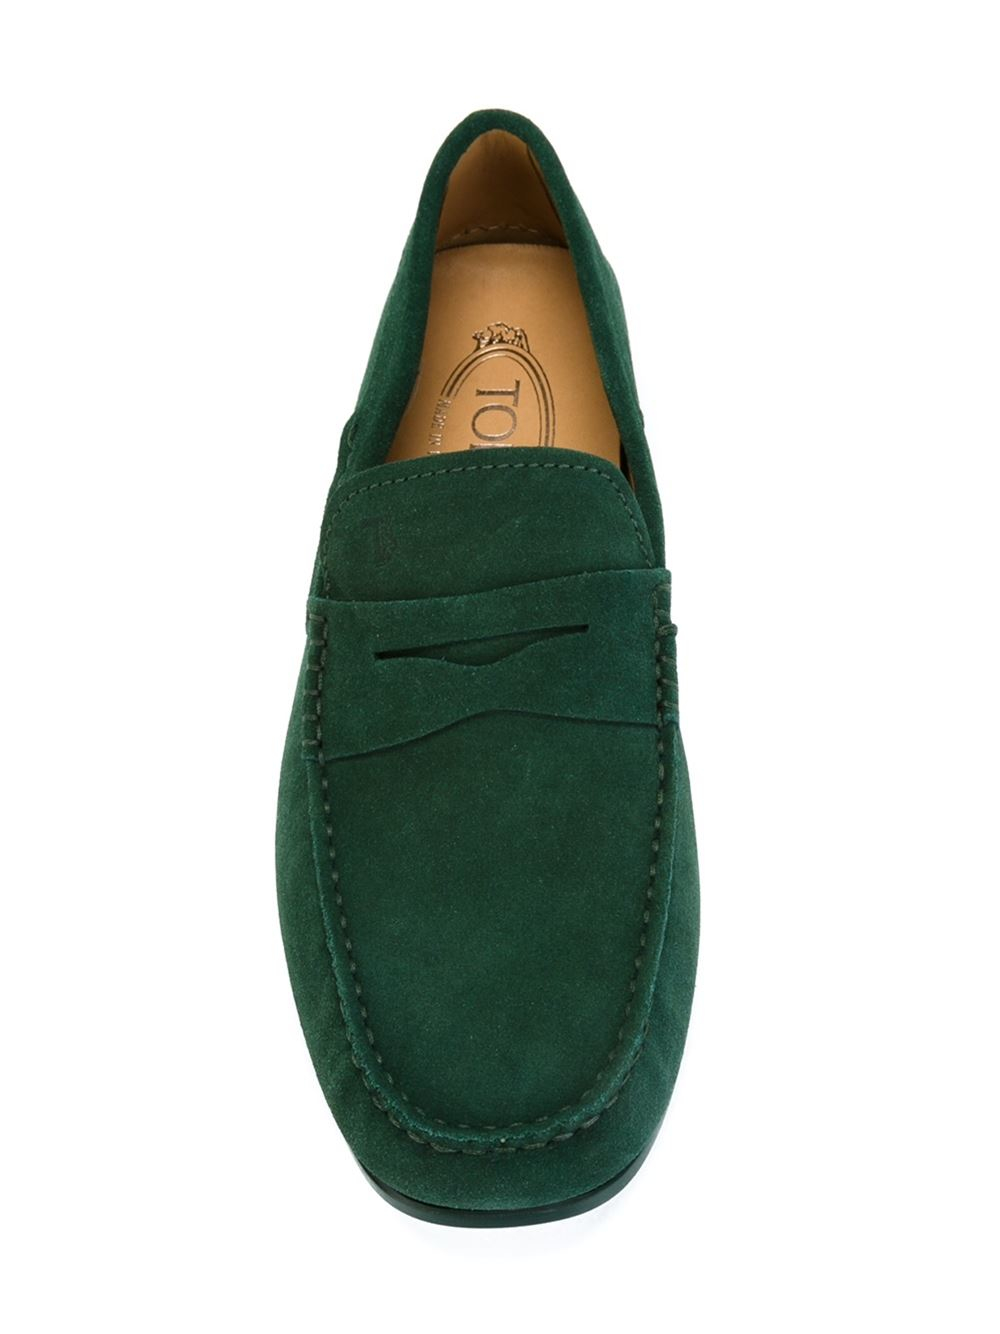 Tod's Suede Loafer Shoes in Green for Men Lyst